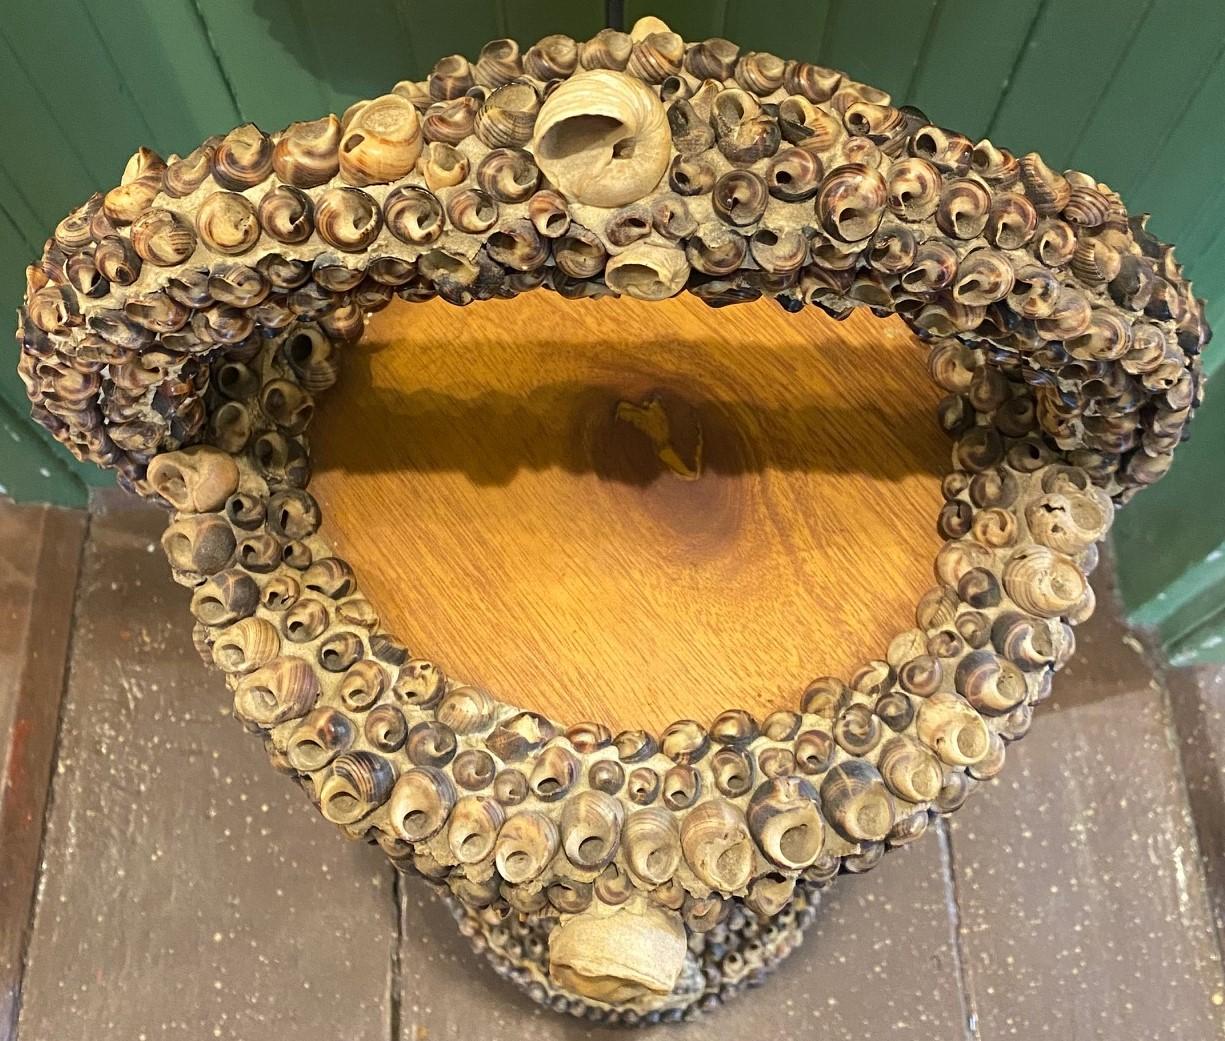 Antique Edwardian Folk Art Sea Shell Decorated Wooden Stand, circa 1920, having a variety of North American periwinkles, moon snails, oysters, etc. mounted on a hand-crafted pedestal stand with arched handle: originally a stand for an ash tray but